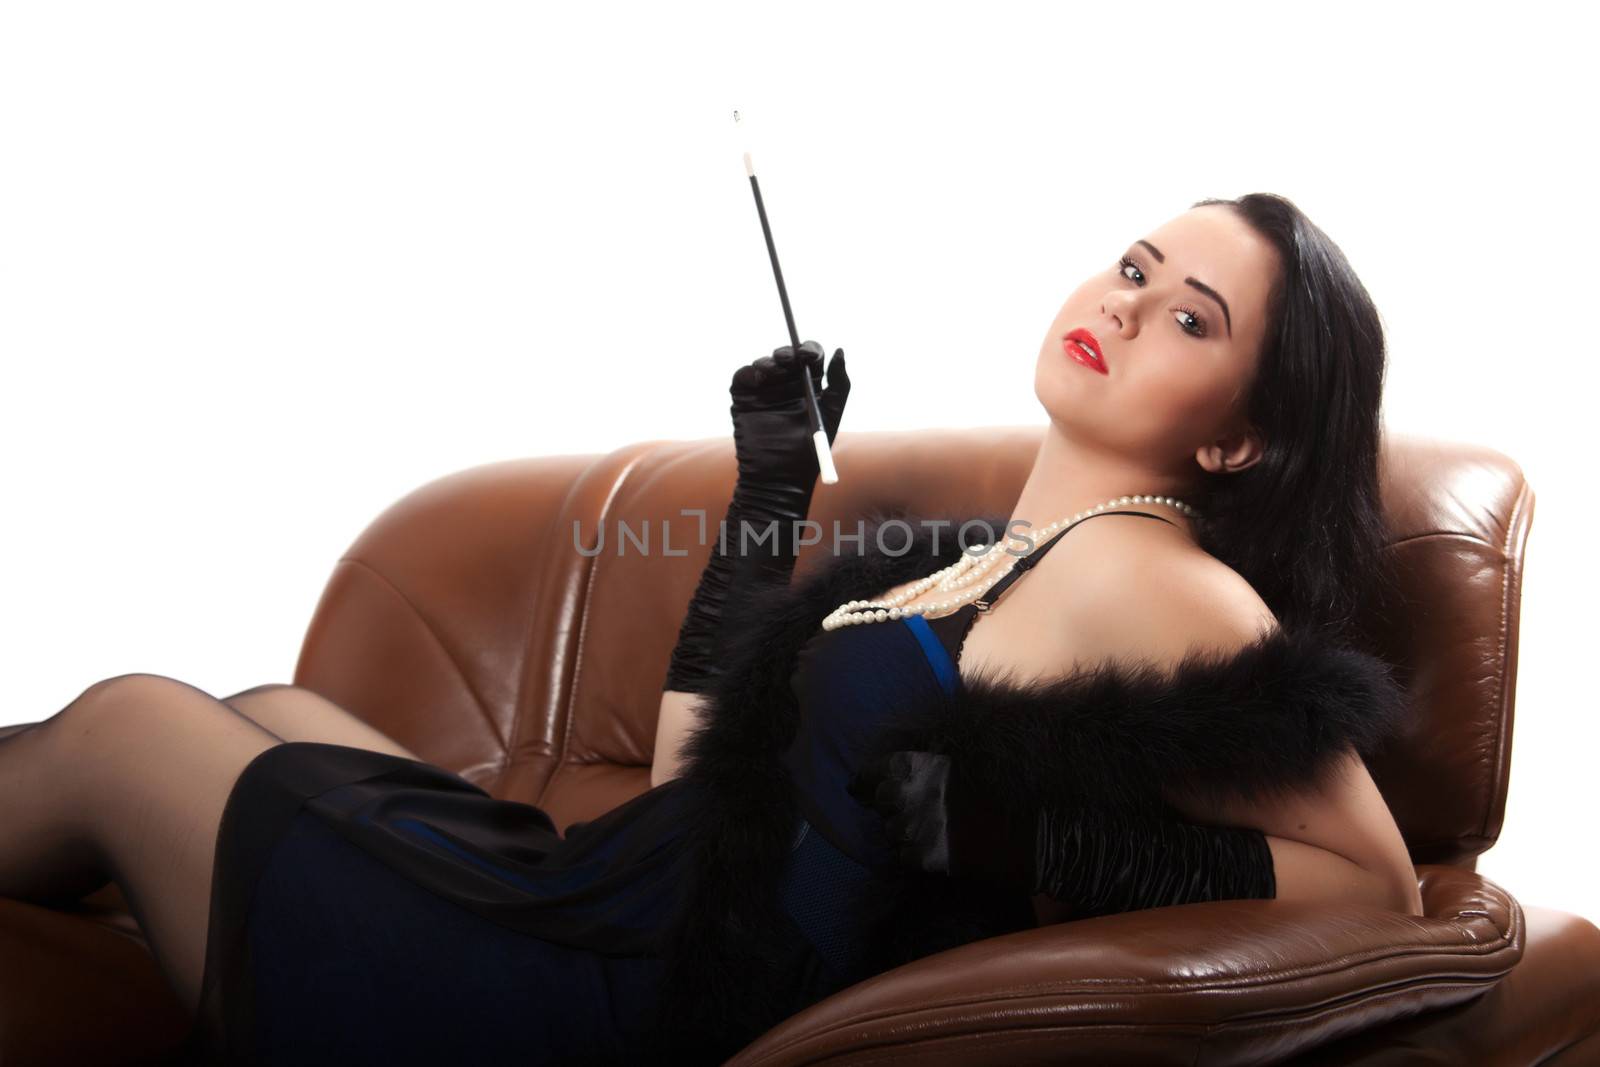 Young woman in retro clothing lying in a big chair with a cigarette holder, on white background